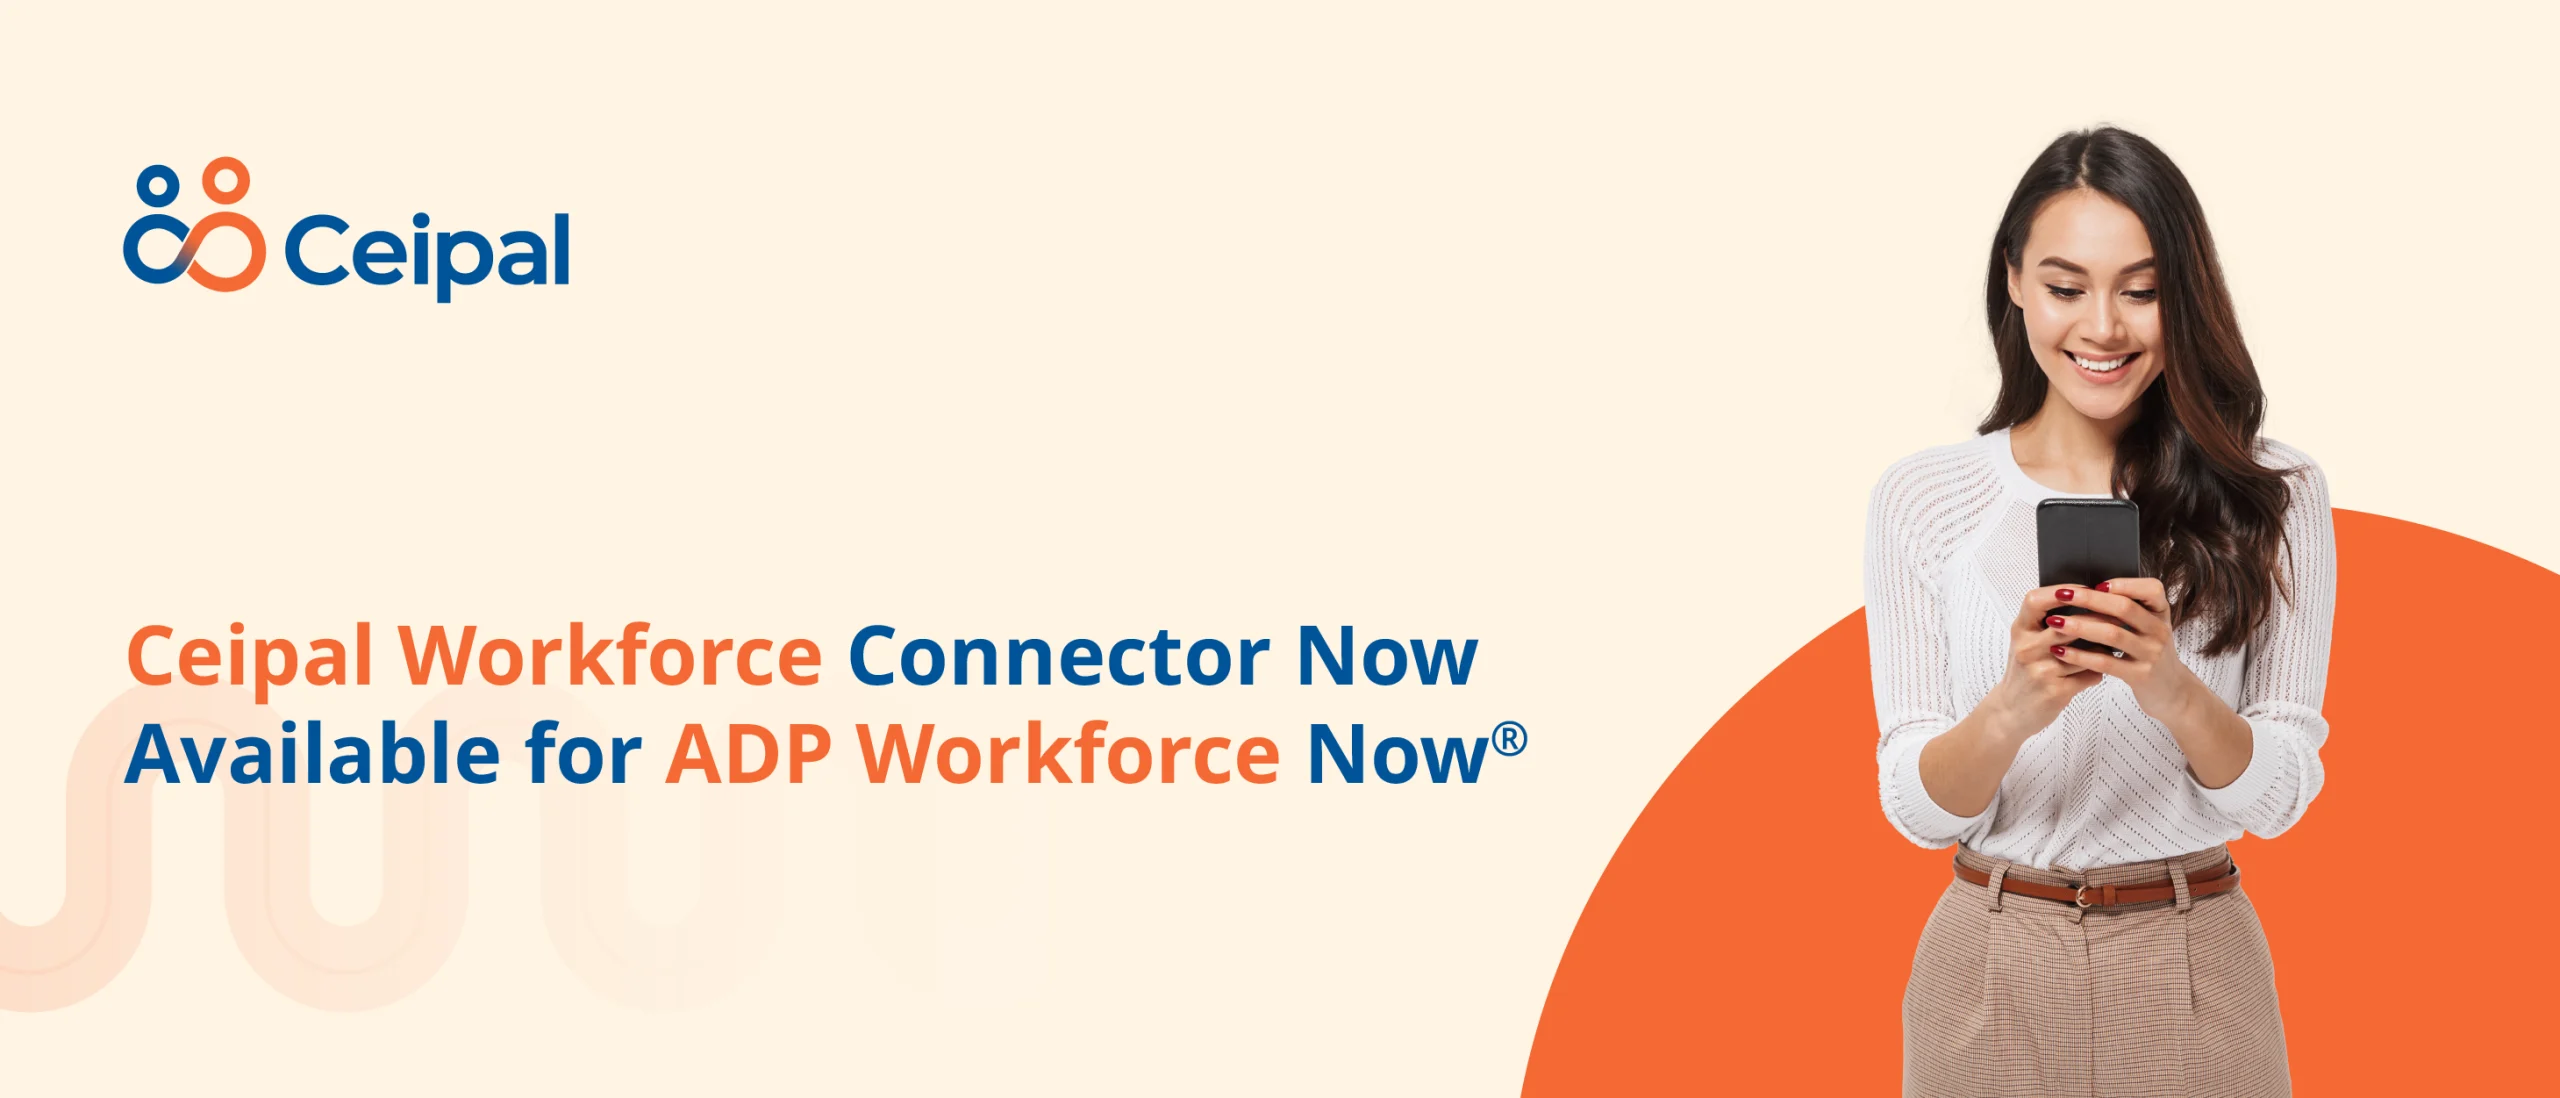 Enhance Workforce Management With Ceipal Workforce Connector on ADP Marketplace